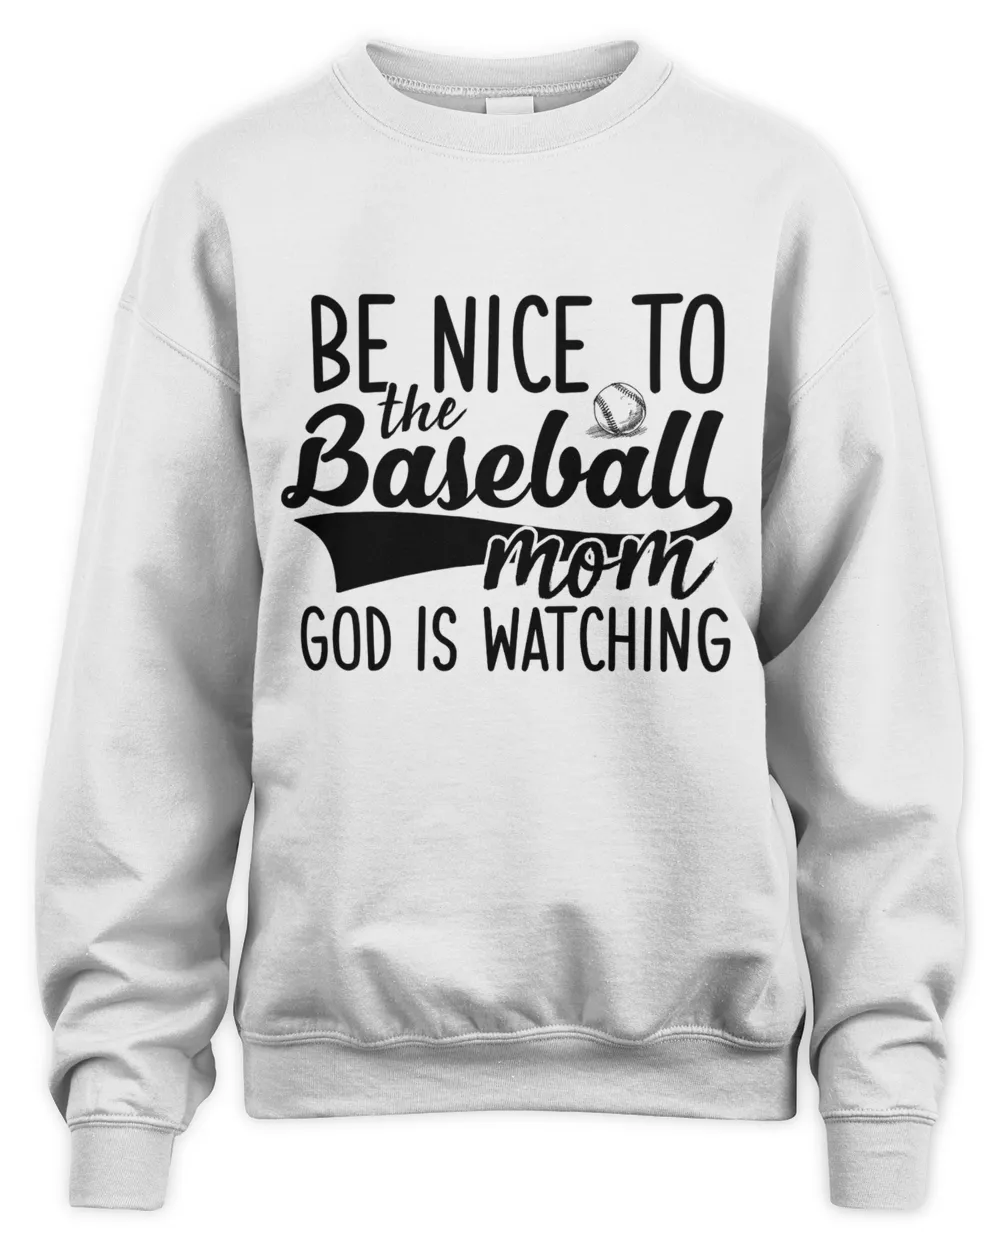 Be Nice to the Baseball mom God is Watching t shirt